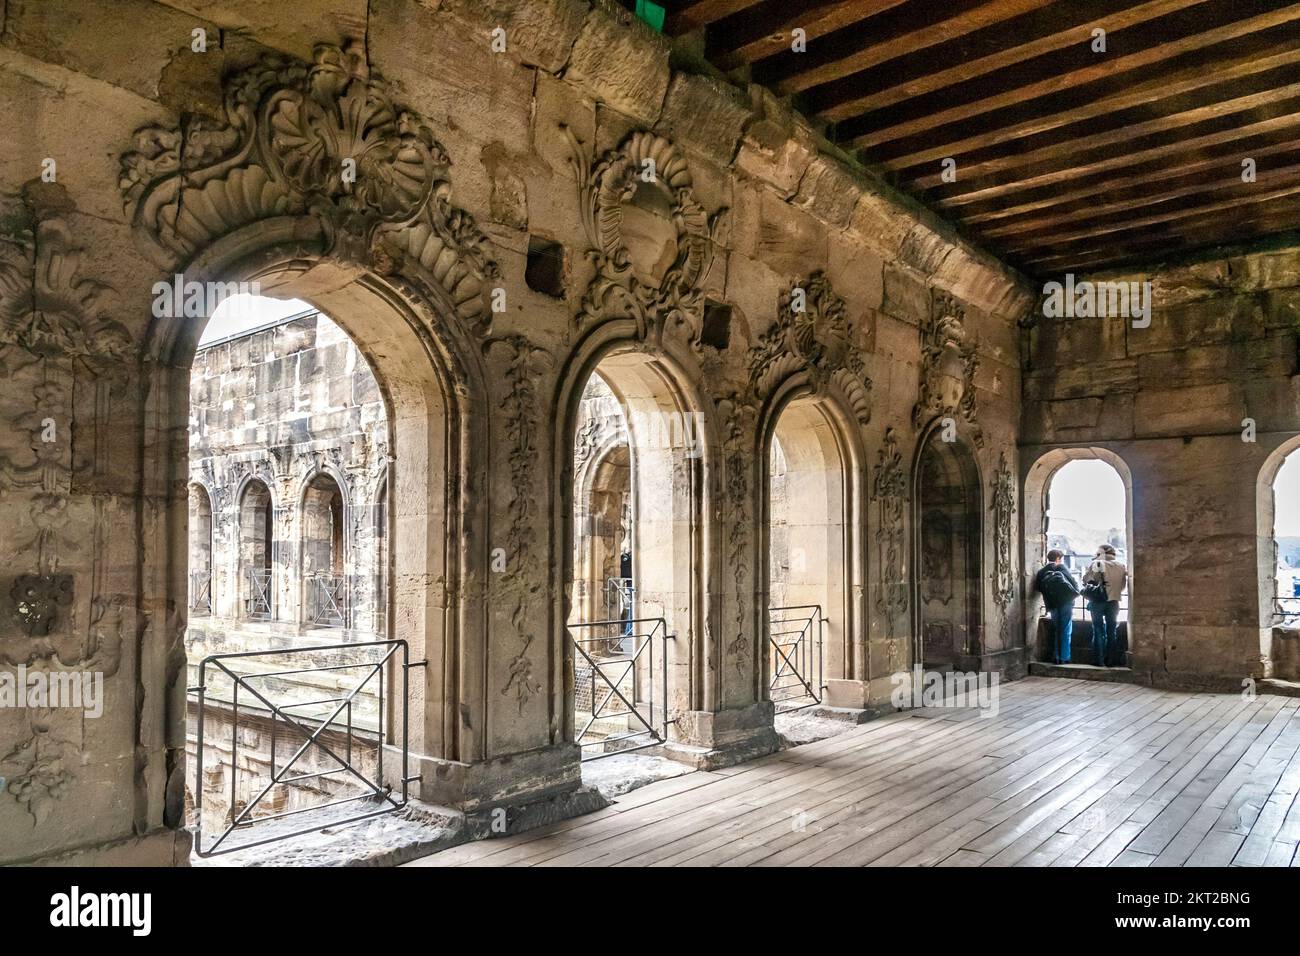 Nice view inside a room with a wooden floor, wooden beam ceiling and Baroque reliefs carved out of the sandstone wall of the famous Porta Nigra, a... Stock Photo